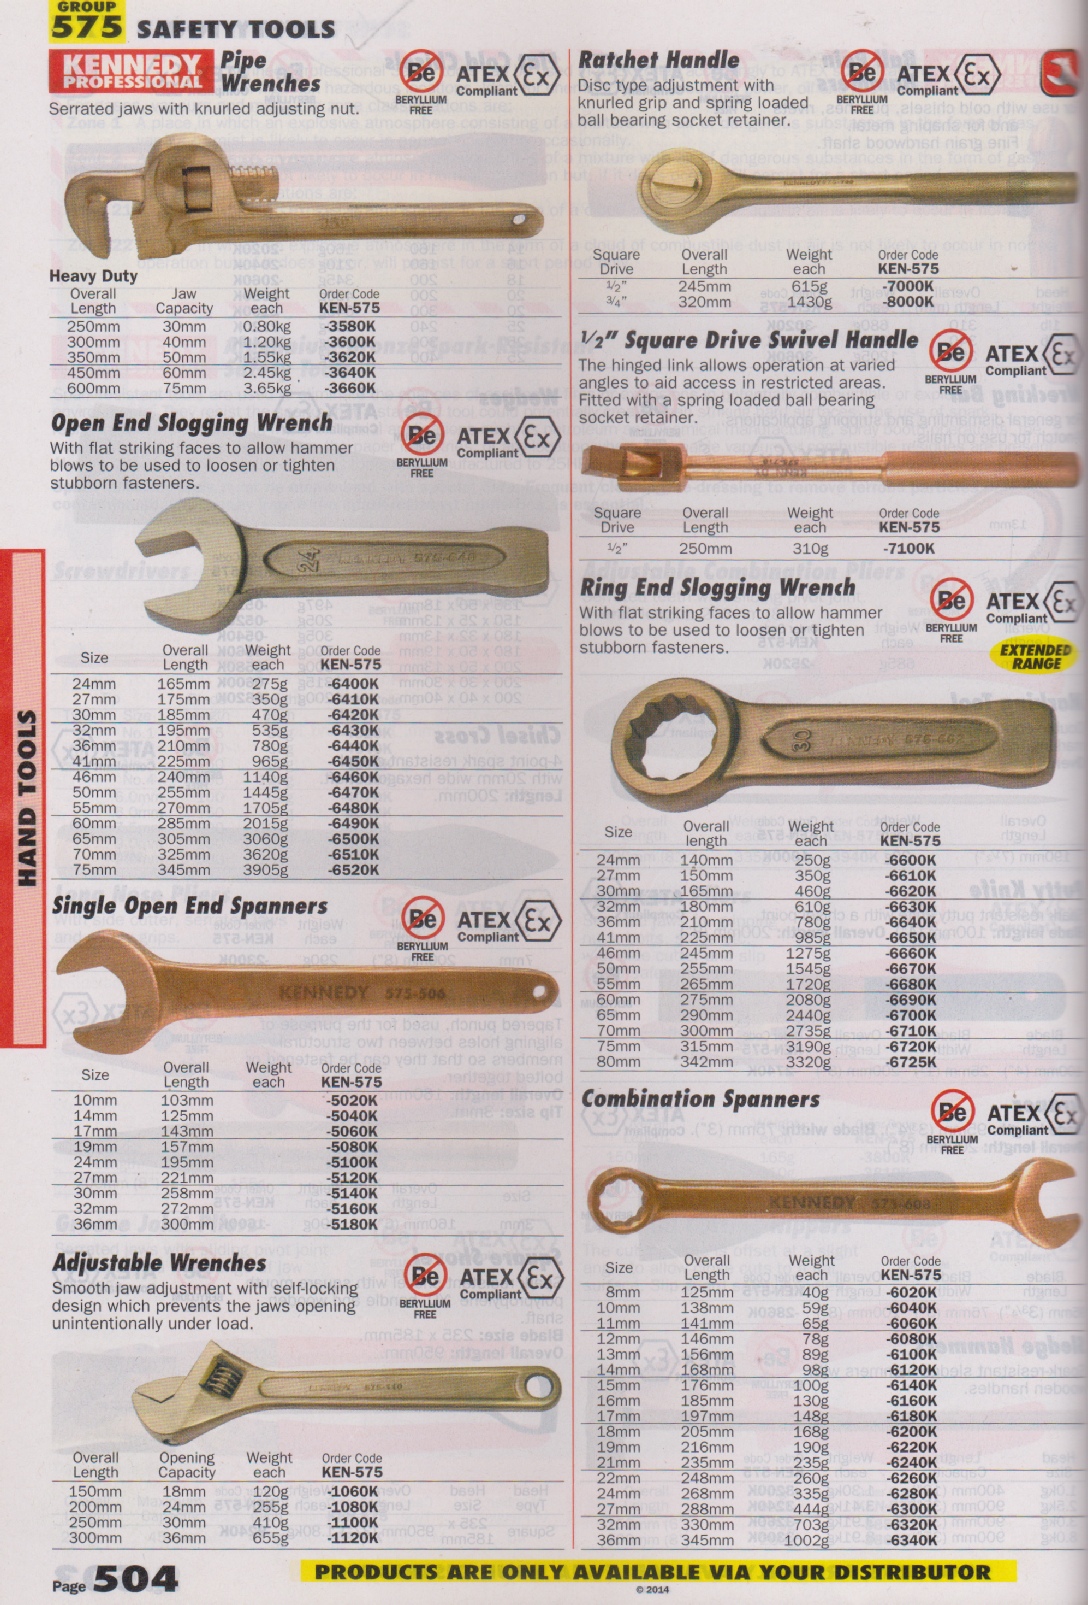 non sparking safety tools,chennai, aluminium bronze spark resistant tools,pipe wrenches,ratchet handle,open end slogging wrench,single open end spanners,combination spanners,adjustable wrenches,ring end slogging wrench